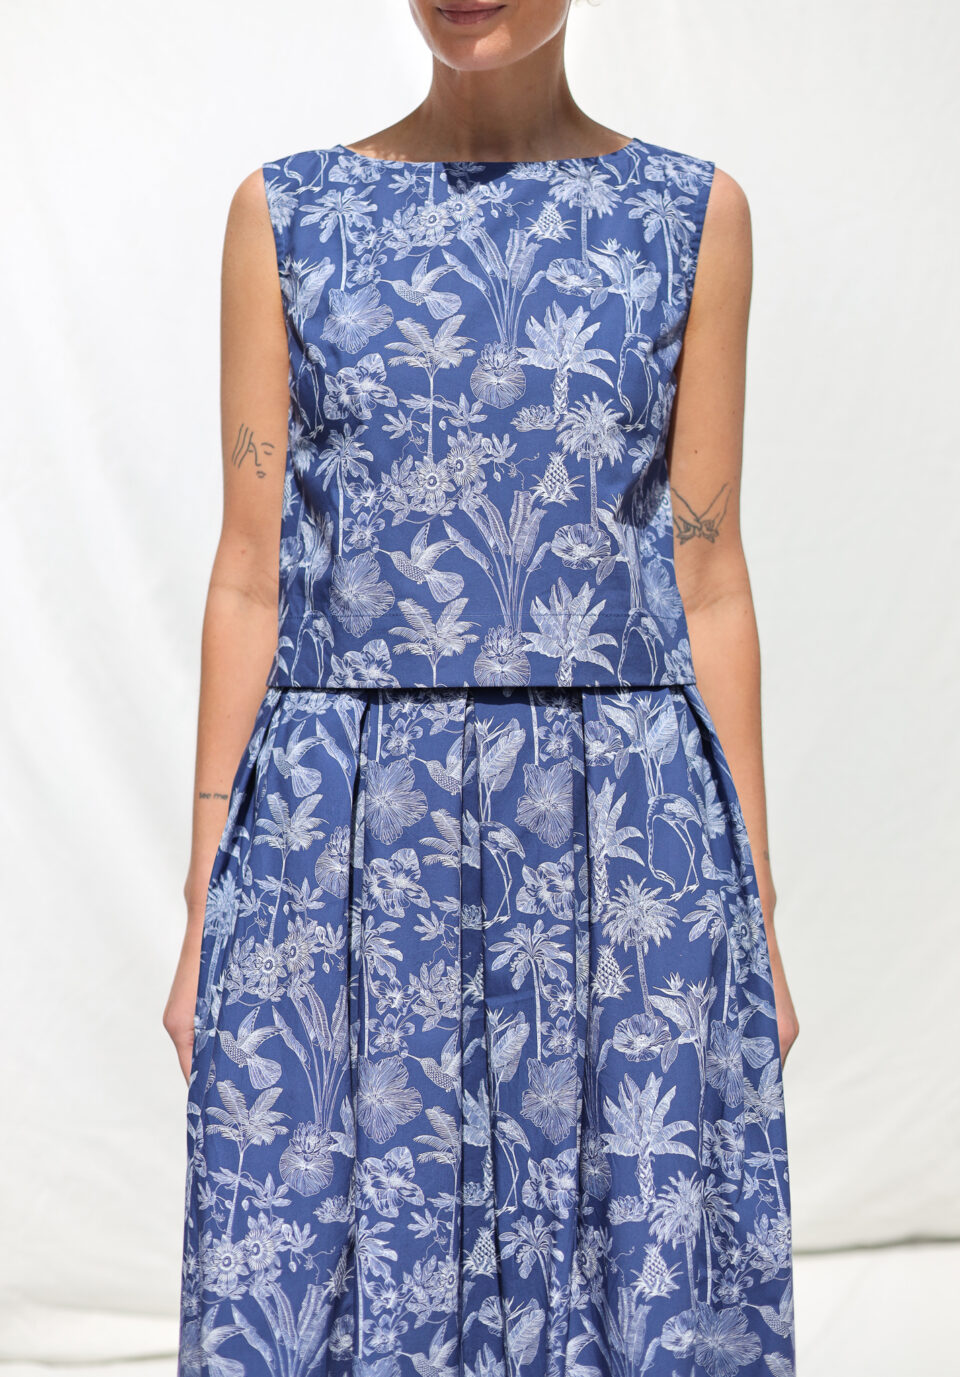 Piccadilly poplin cotton sleeveless cropped top Darwin's Journey blue print | Top | Sustainable clothing | OffOn clothing